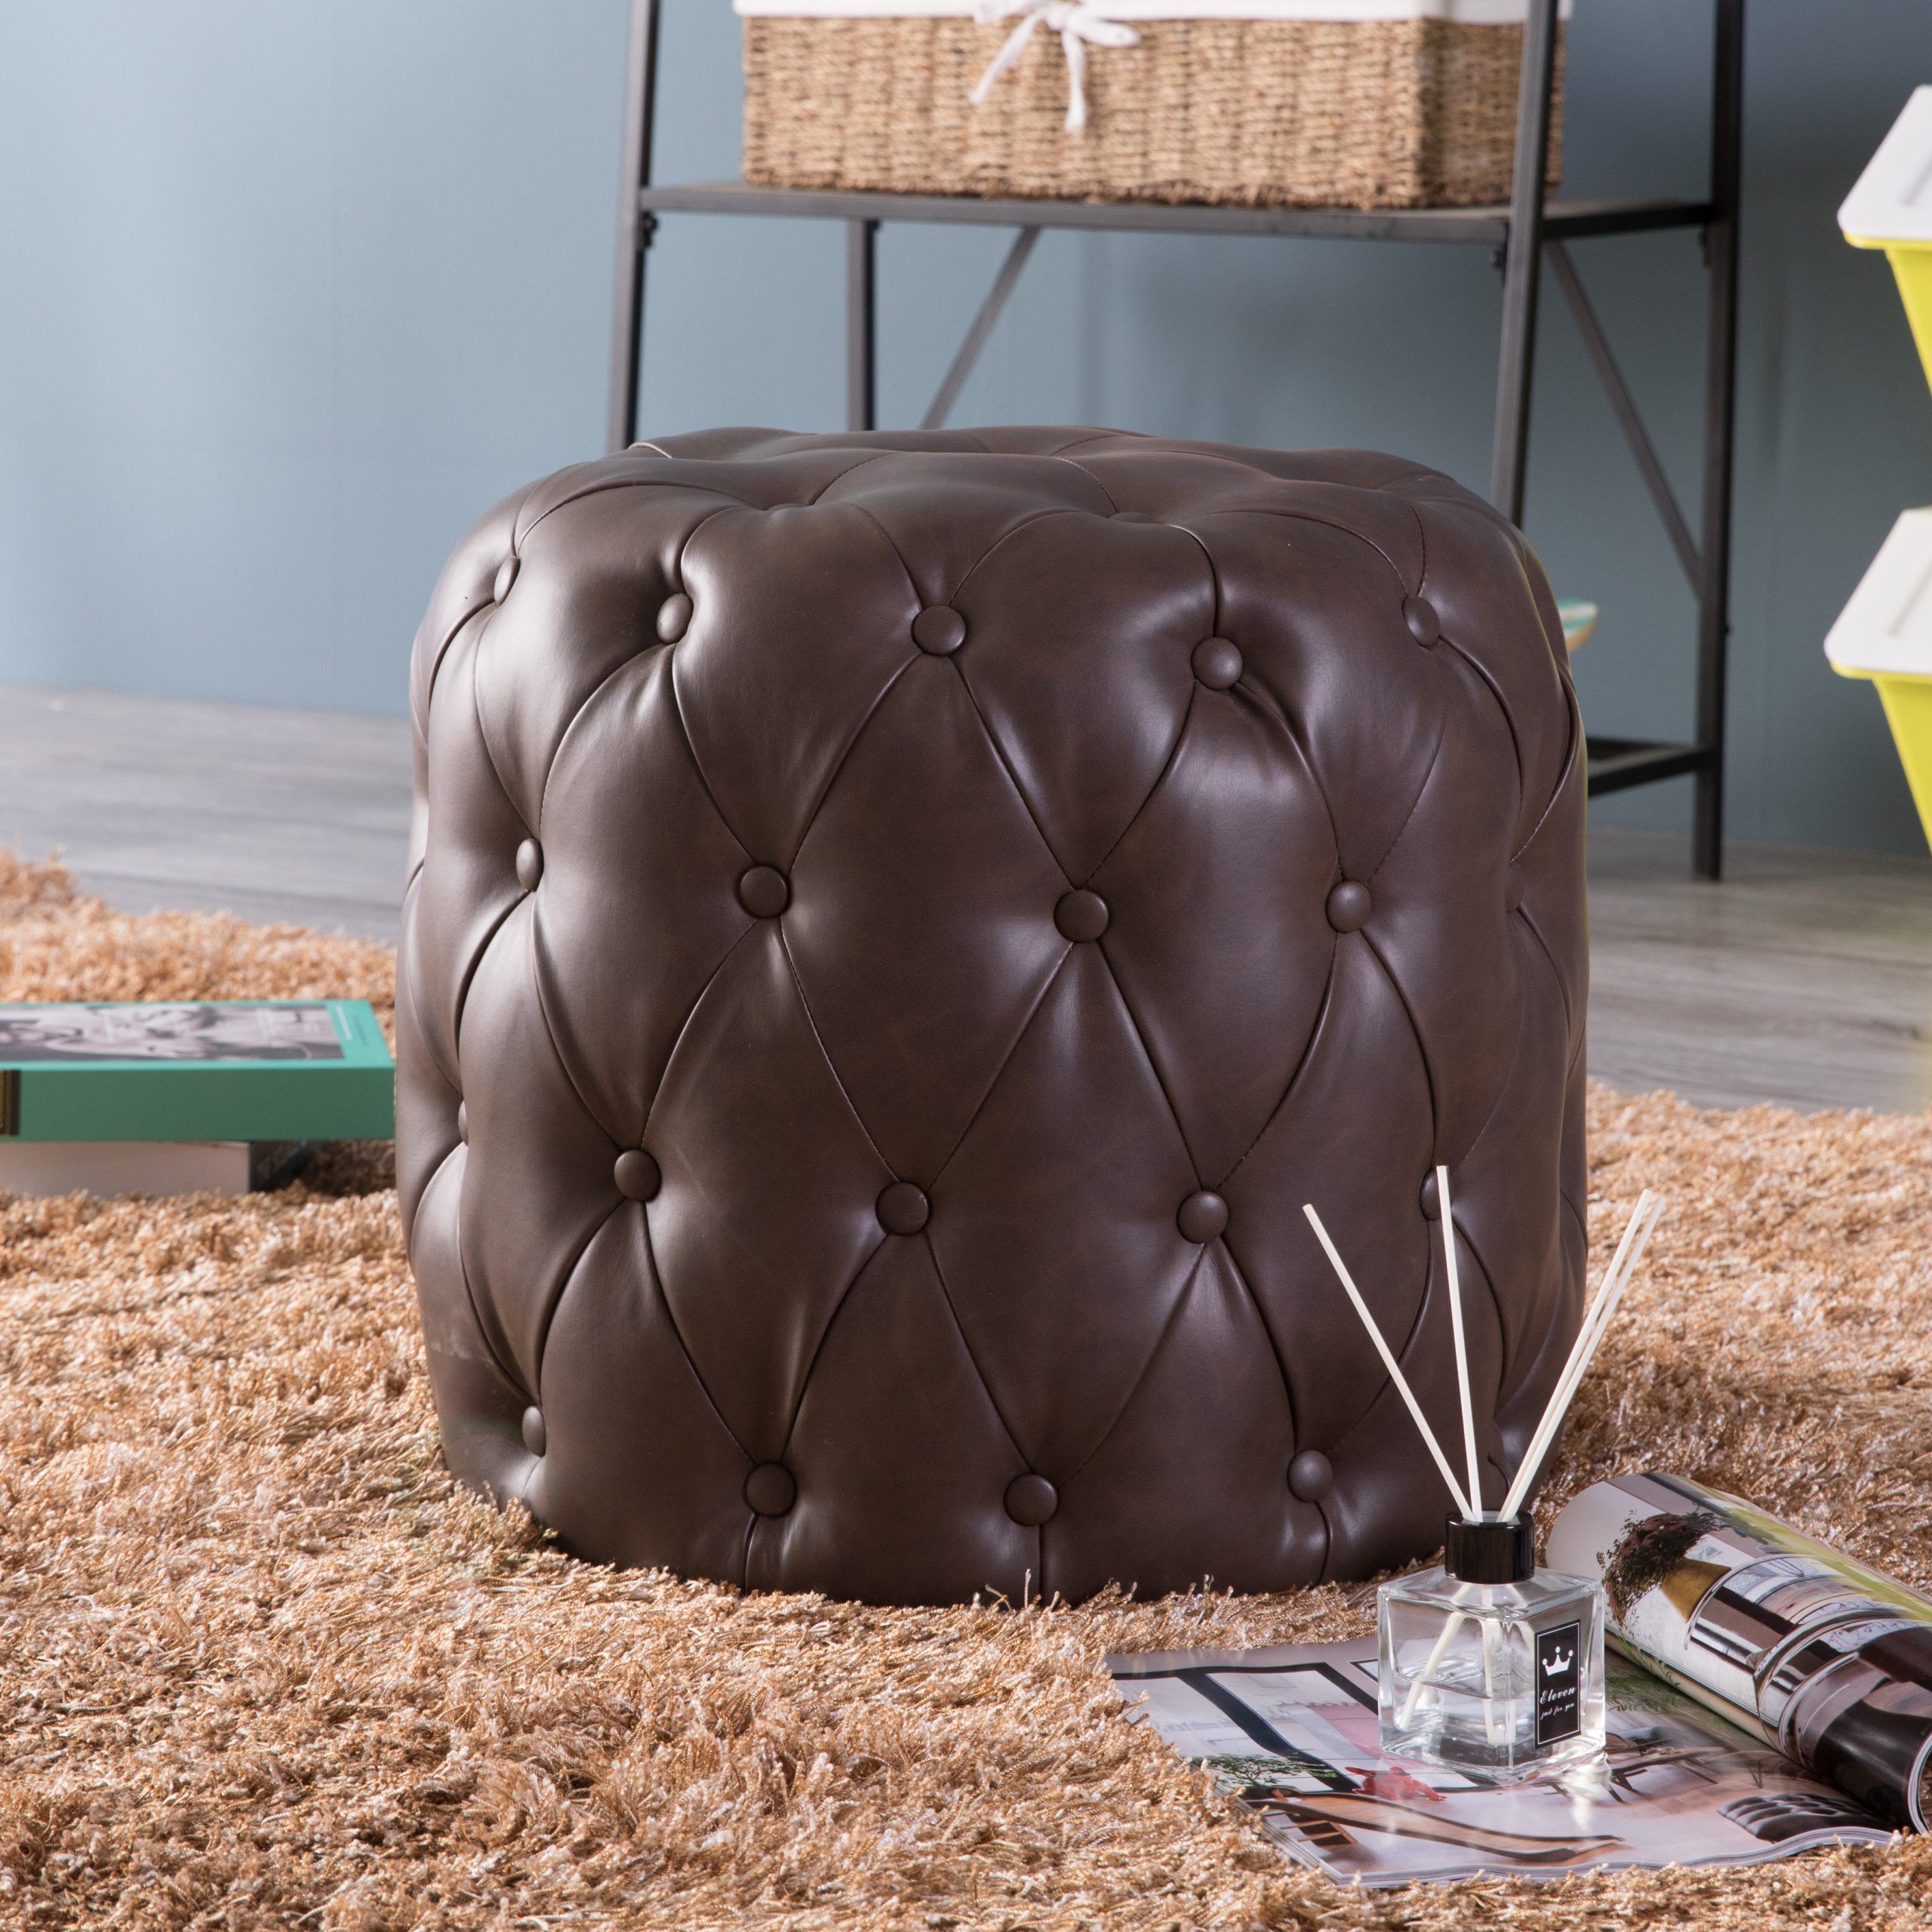 New Bold Tones Tufted Modern Leather Round Ottoman Stool, Brown | Ebay For Orange Tufted Faux Leather Storage Ottomans (View 18 of 20)